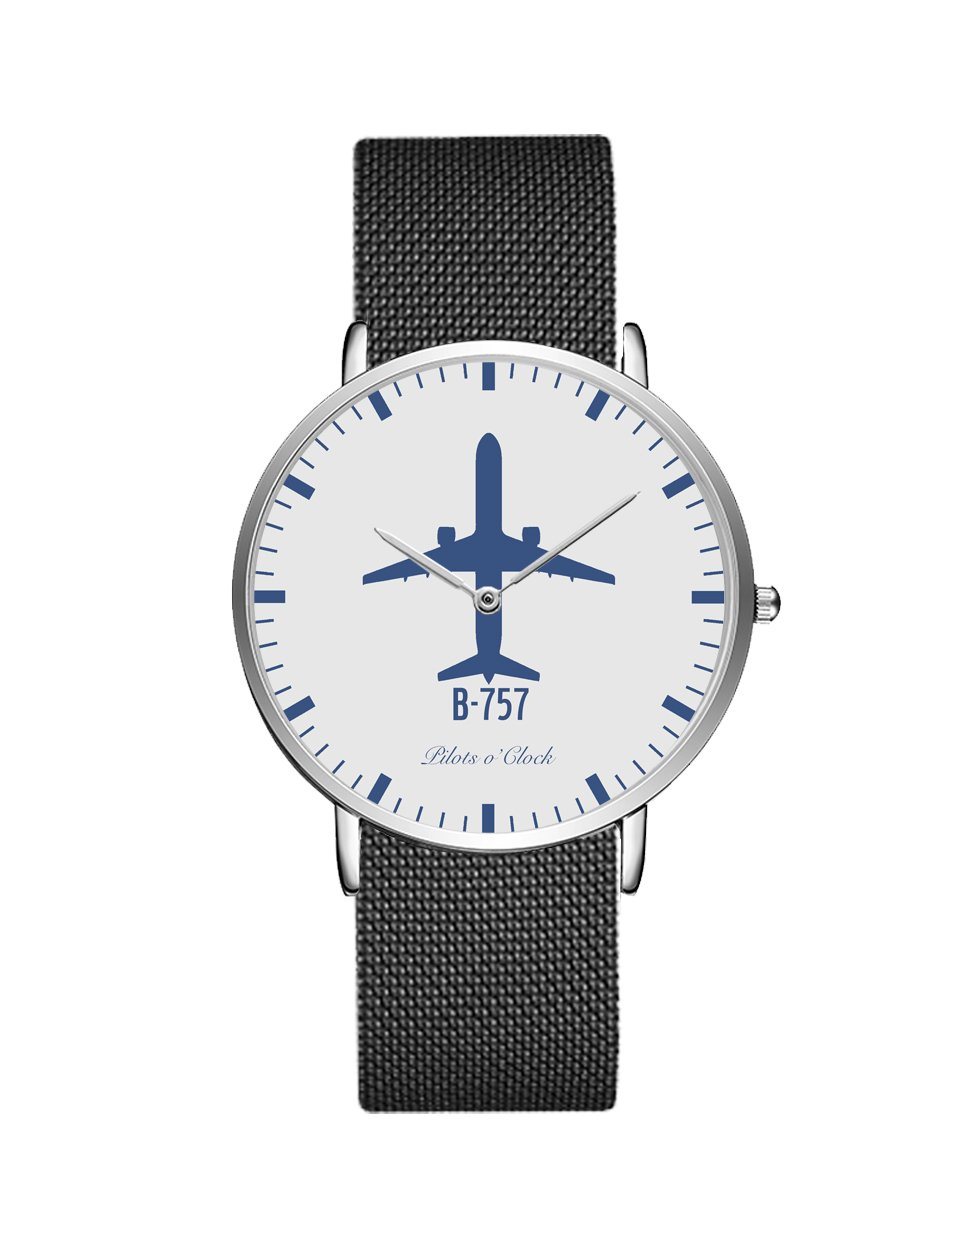 Boeing 757 Stainless Steel Strap Watches Pilot Eyes Store Silver & Black Stainless Steel Strap 